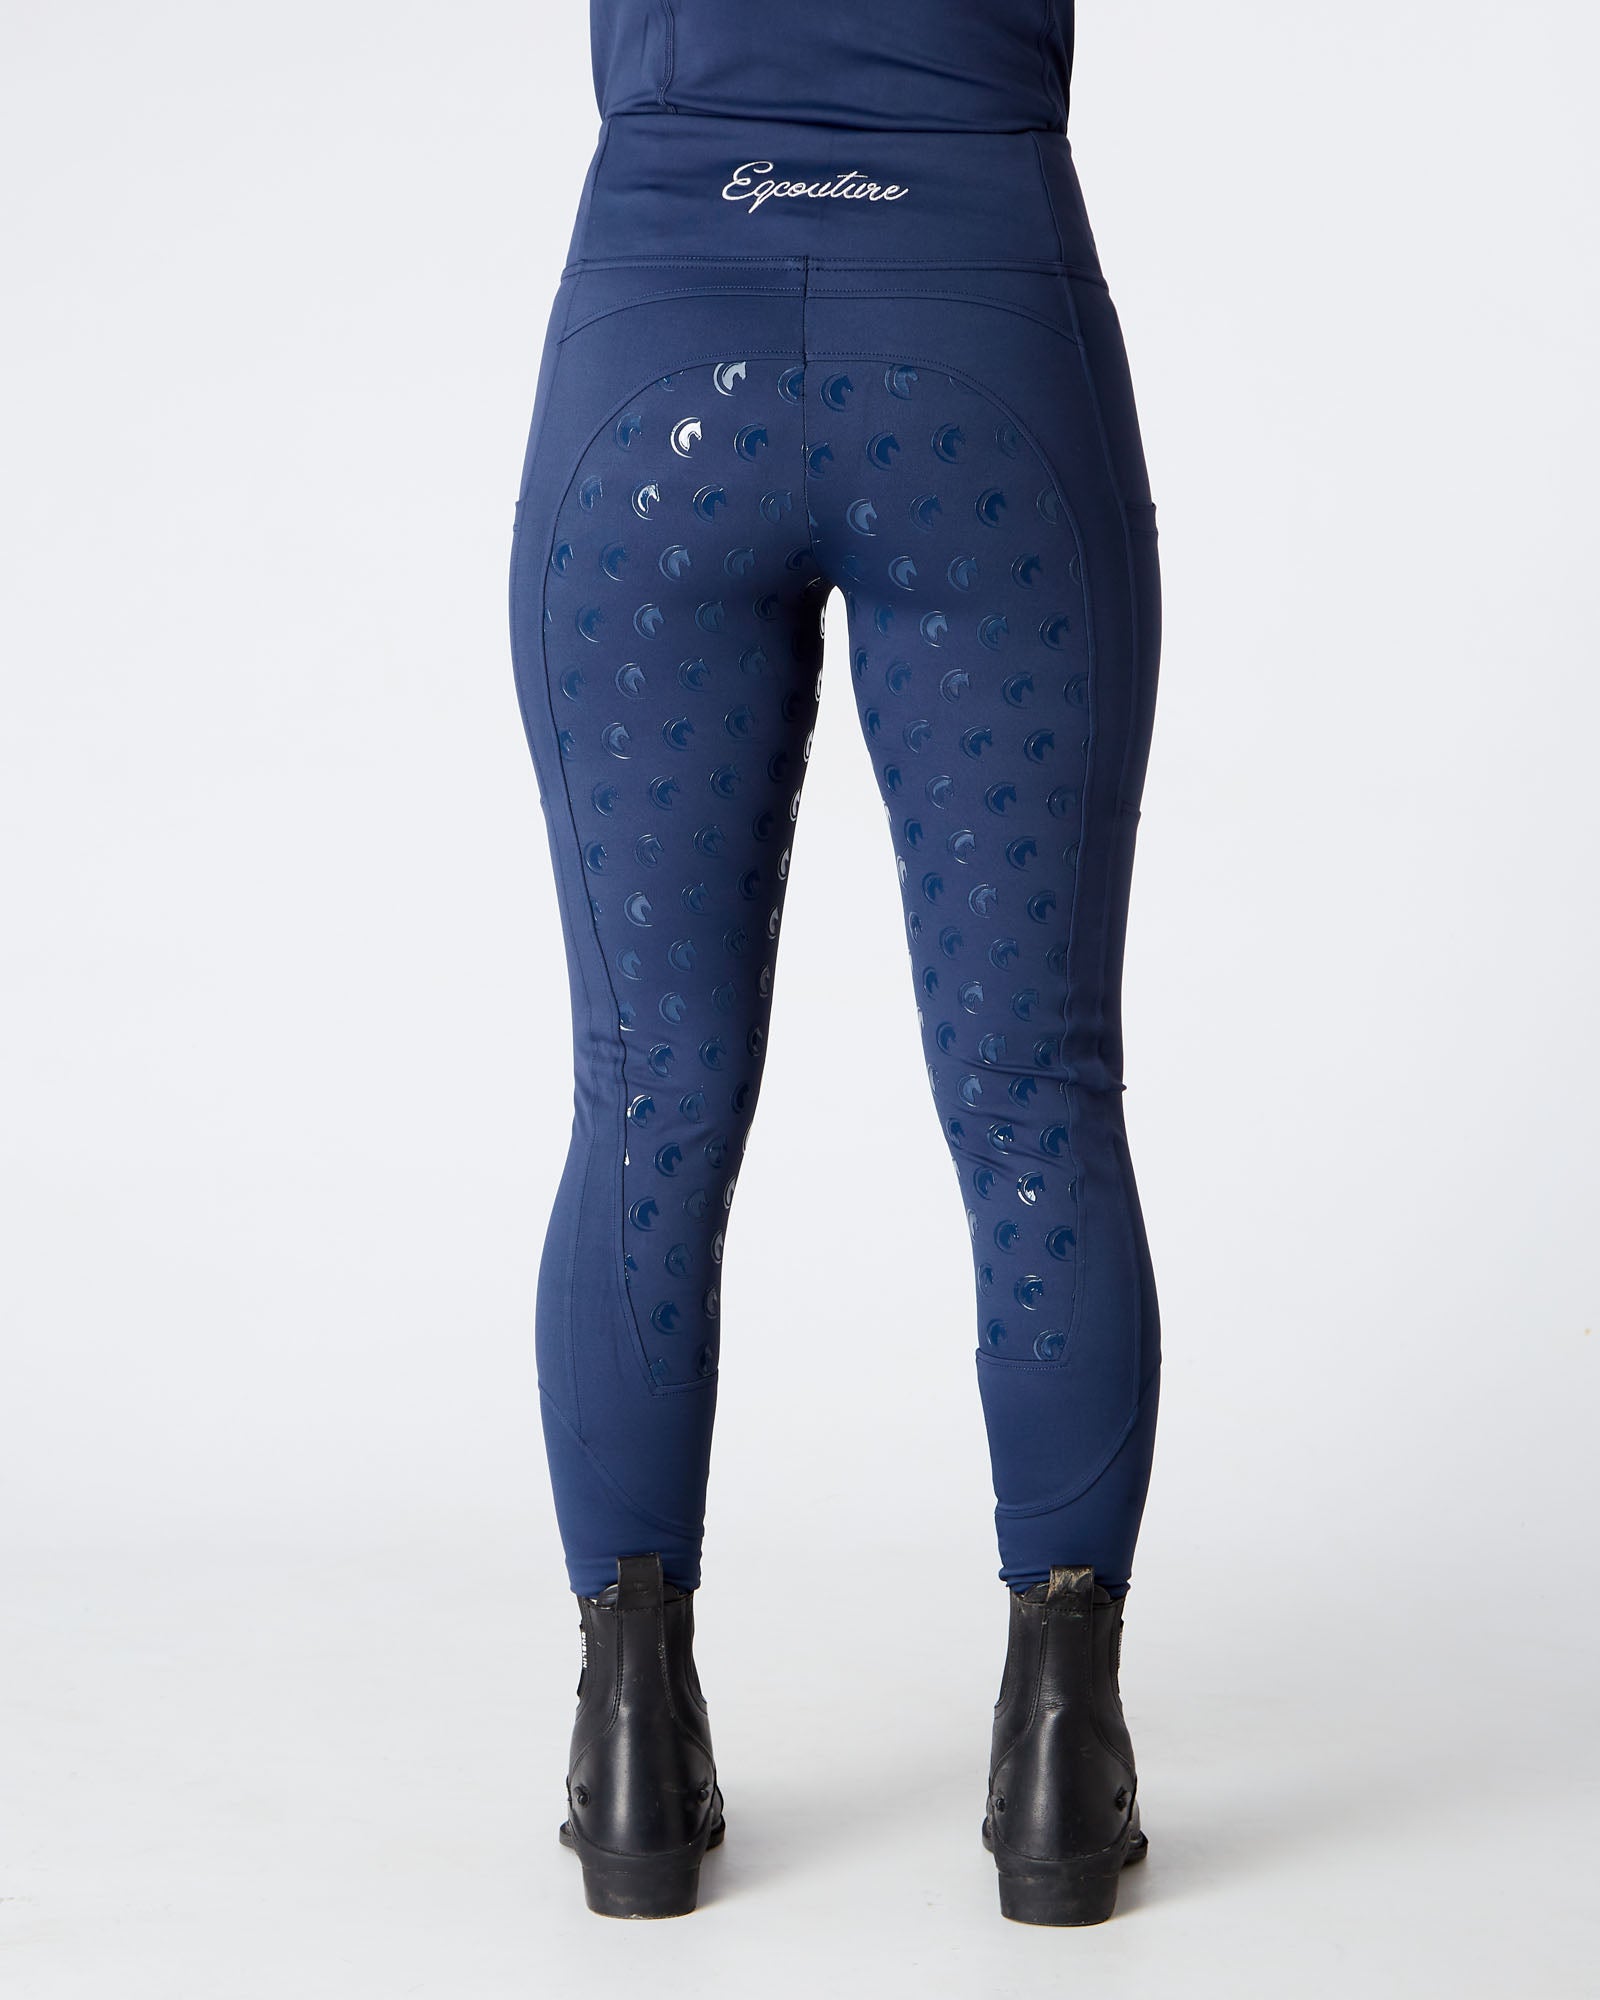 Horse Riding Leggings / Tights / Breeches with phone pockets - NAVY –  Eqcouture